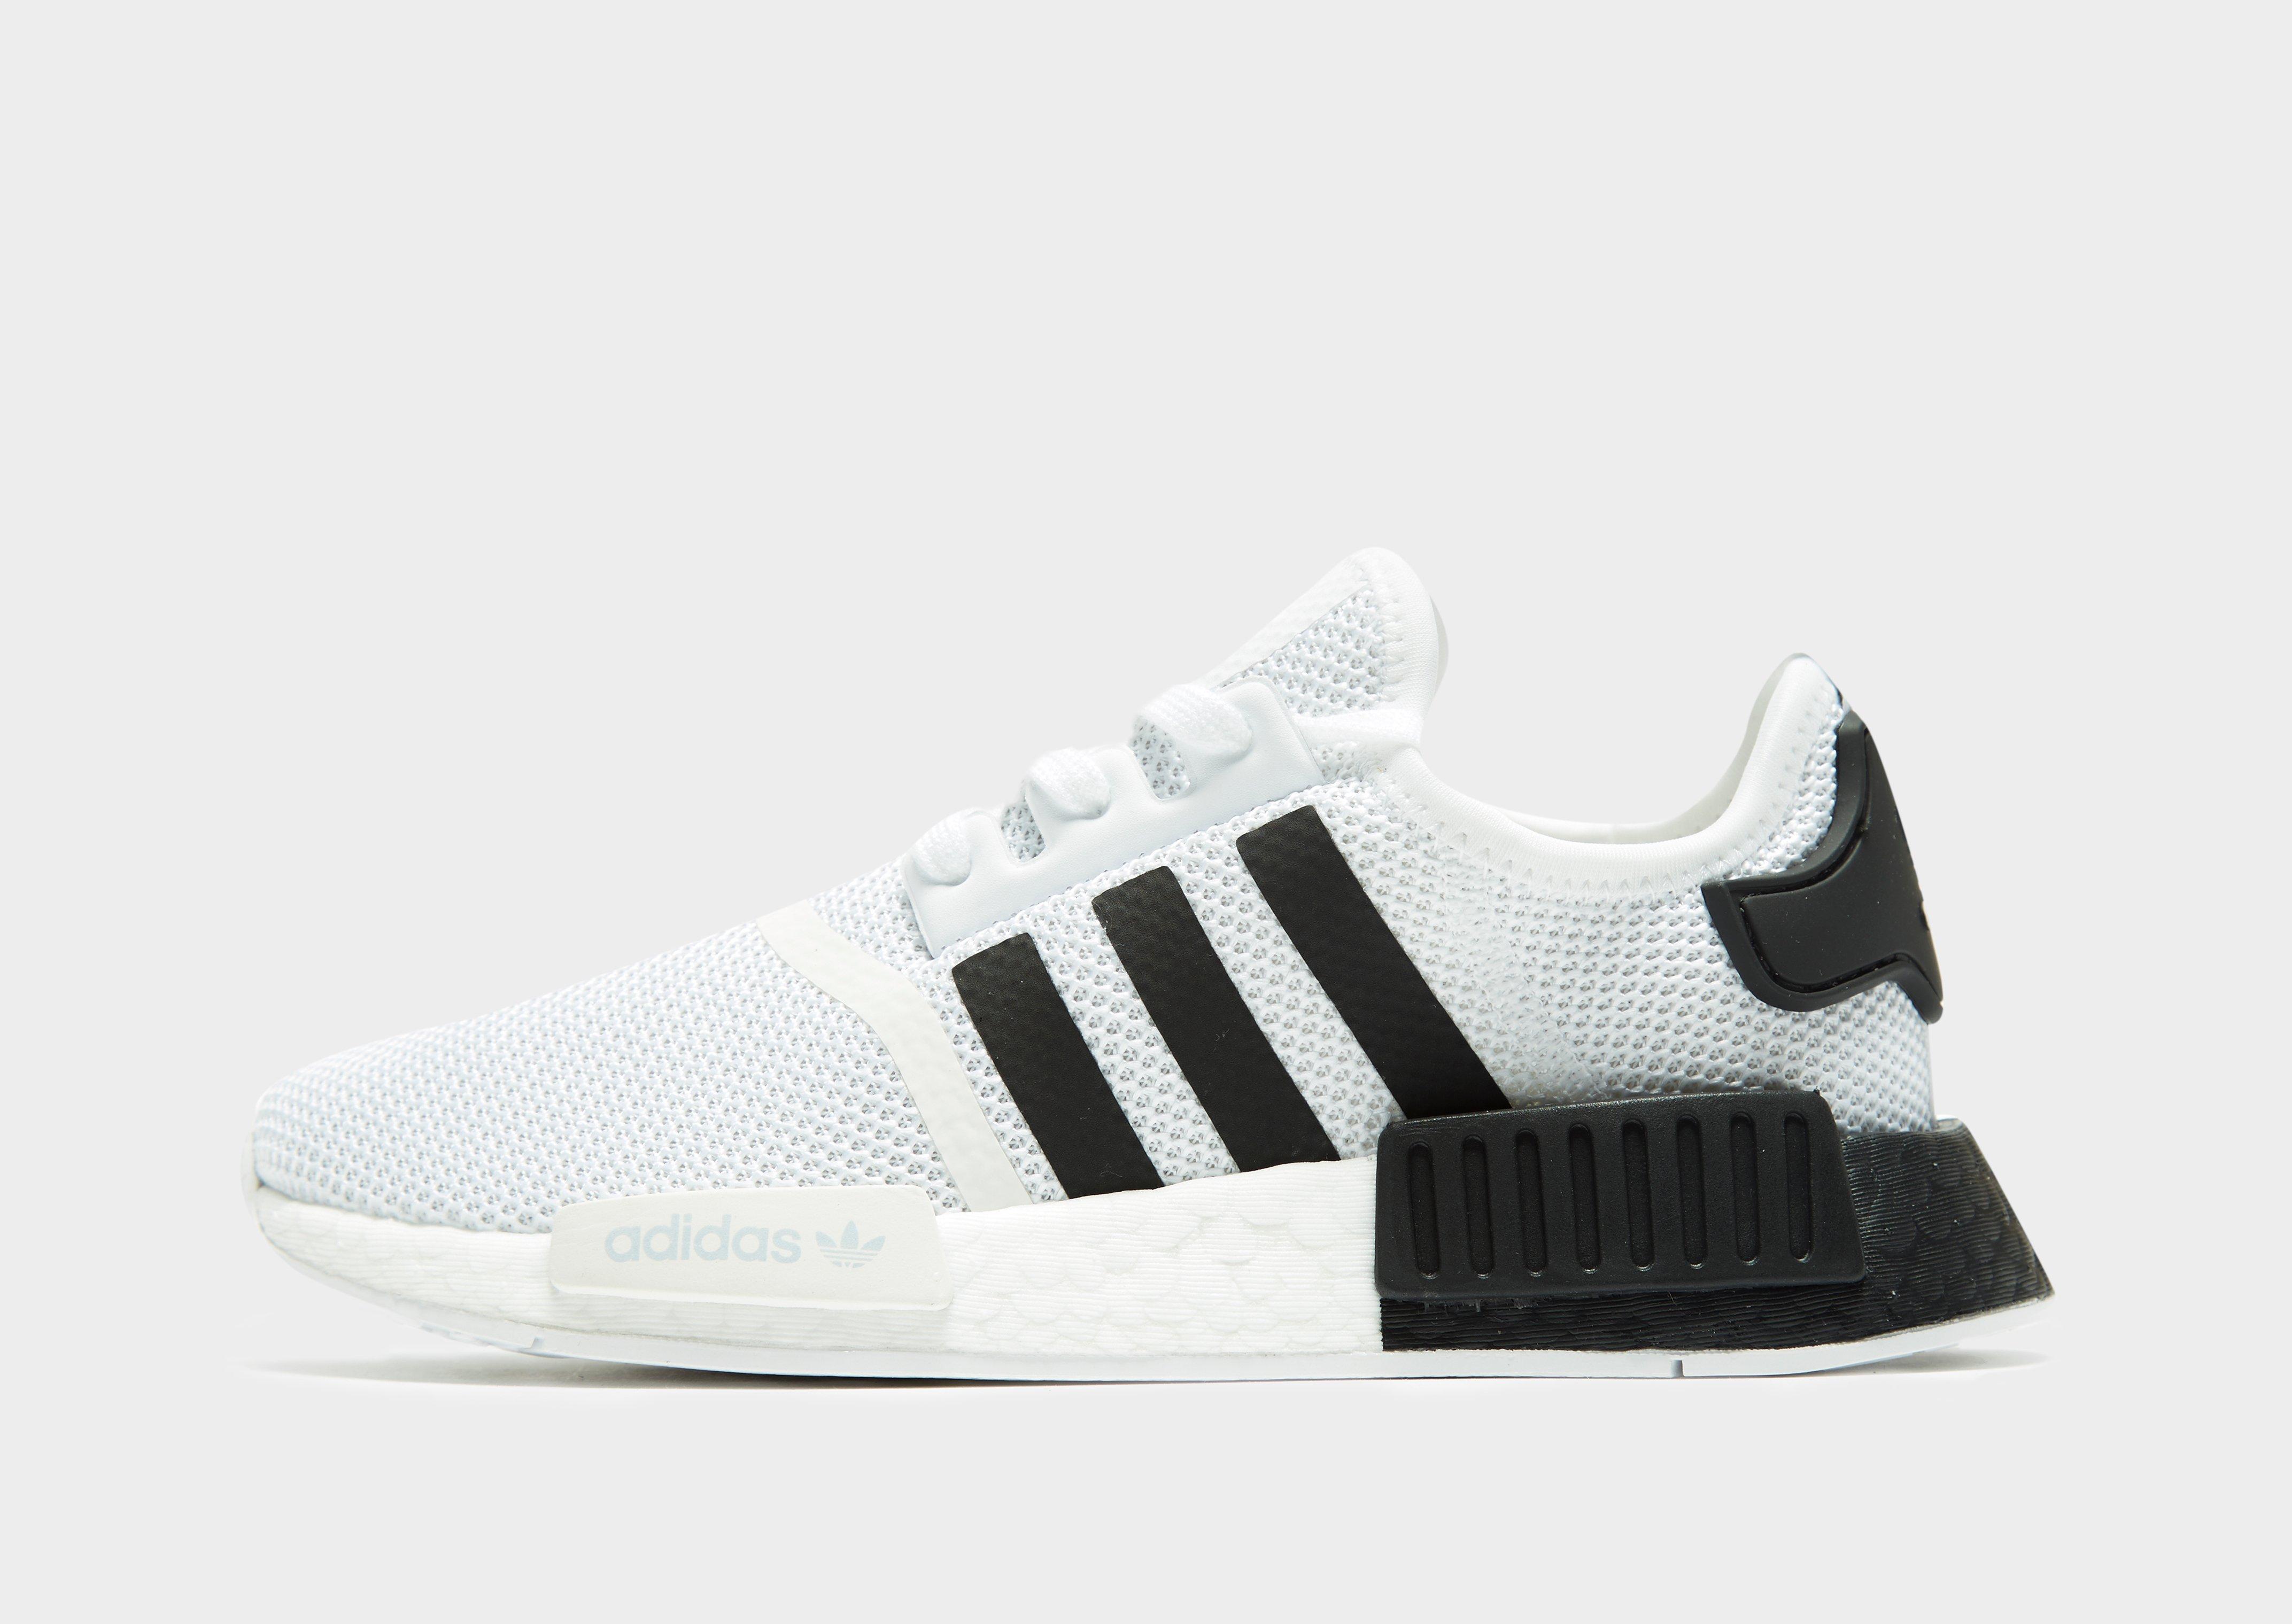 Adidas NMD R1 95 CHAMPS EXCLUSIVE B39505